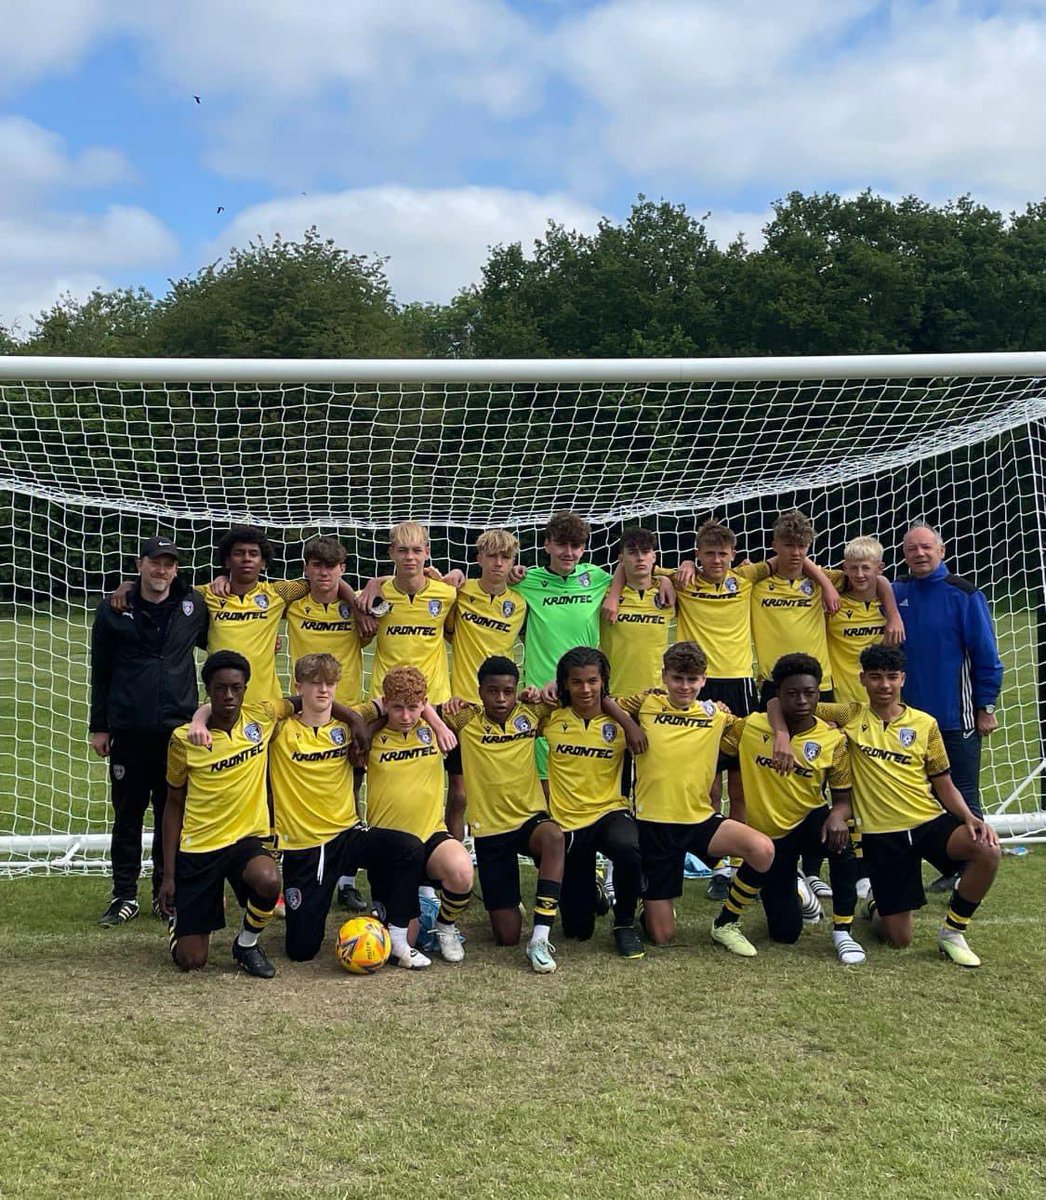 Huge congratulations to our @WiltsFCAcademy U15 team, who lifted the Championship Cup, at the The @jpluk British Cup Competition🟡⚫️⚽️👏🏆

#jplbritishcup #nsxsports #JPL